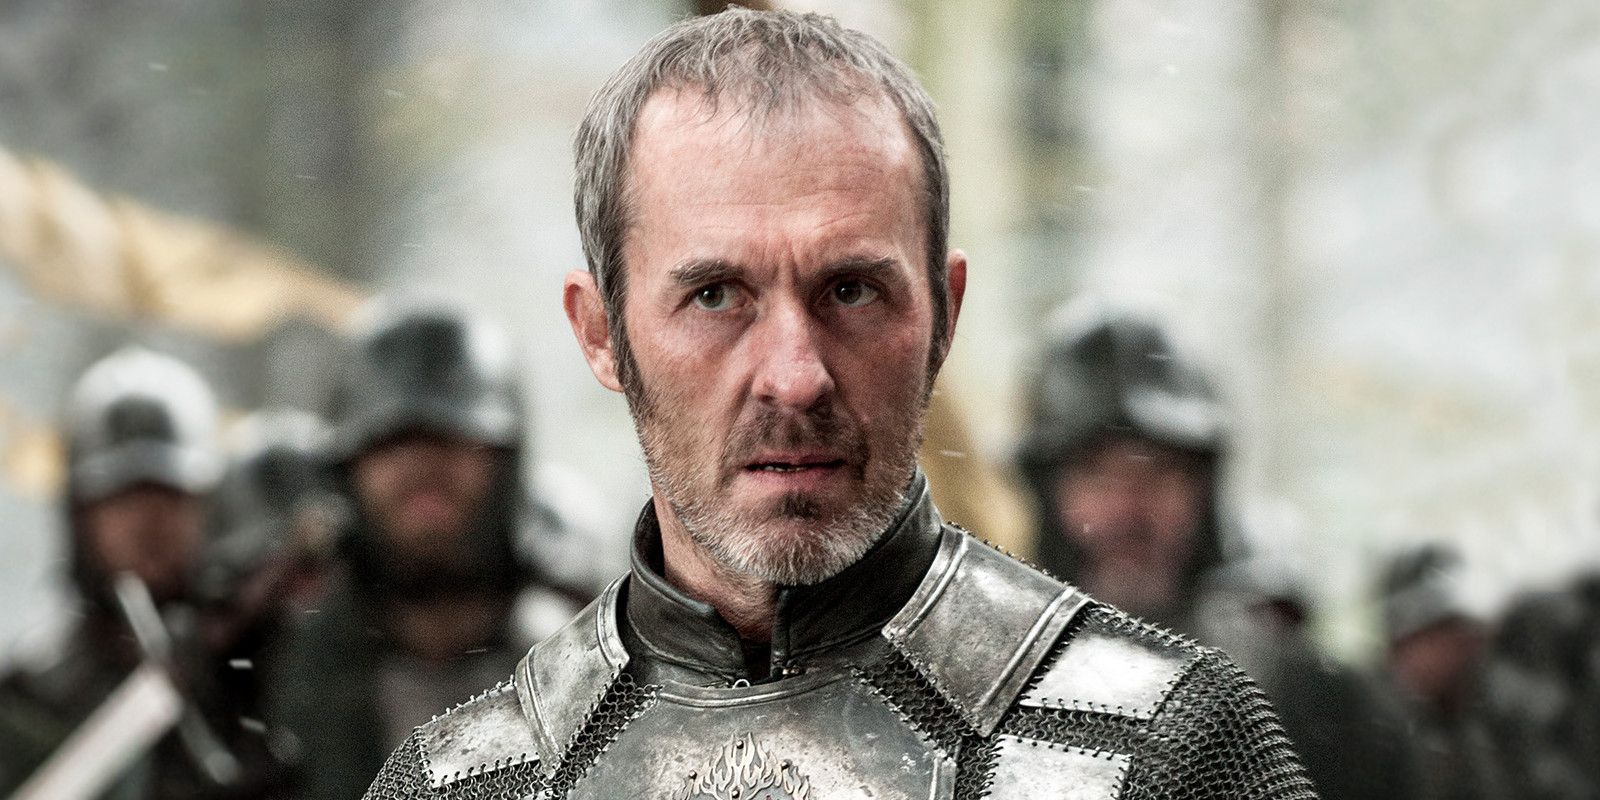 Stannis Baratheon looking serious while his army stands behind him in Game of Thrones.